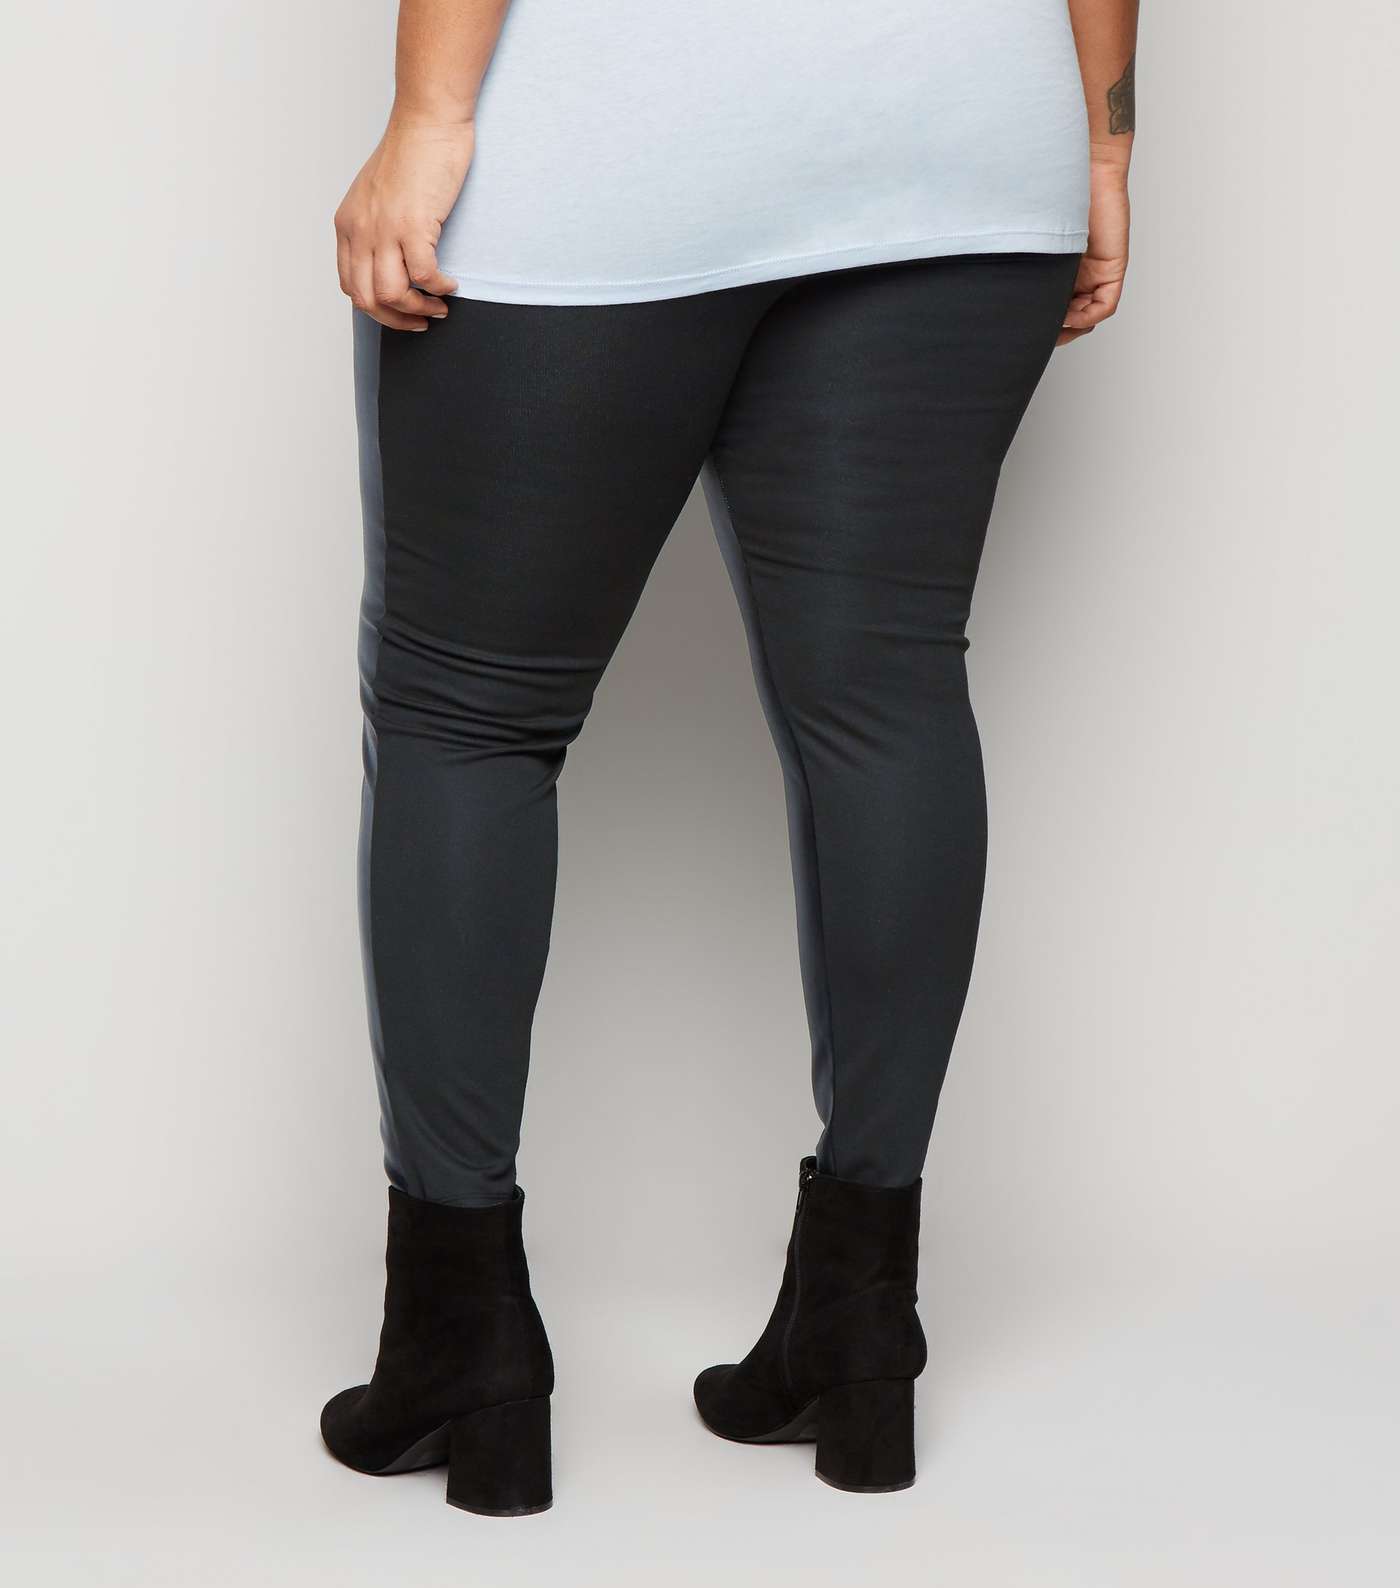 Curves Black Leather-Look Front Leggings Image 3